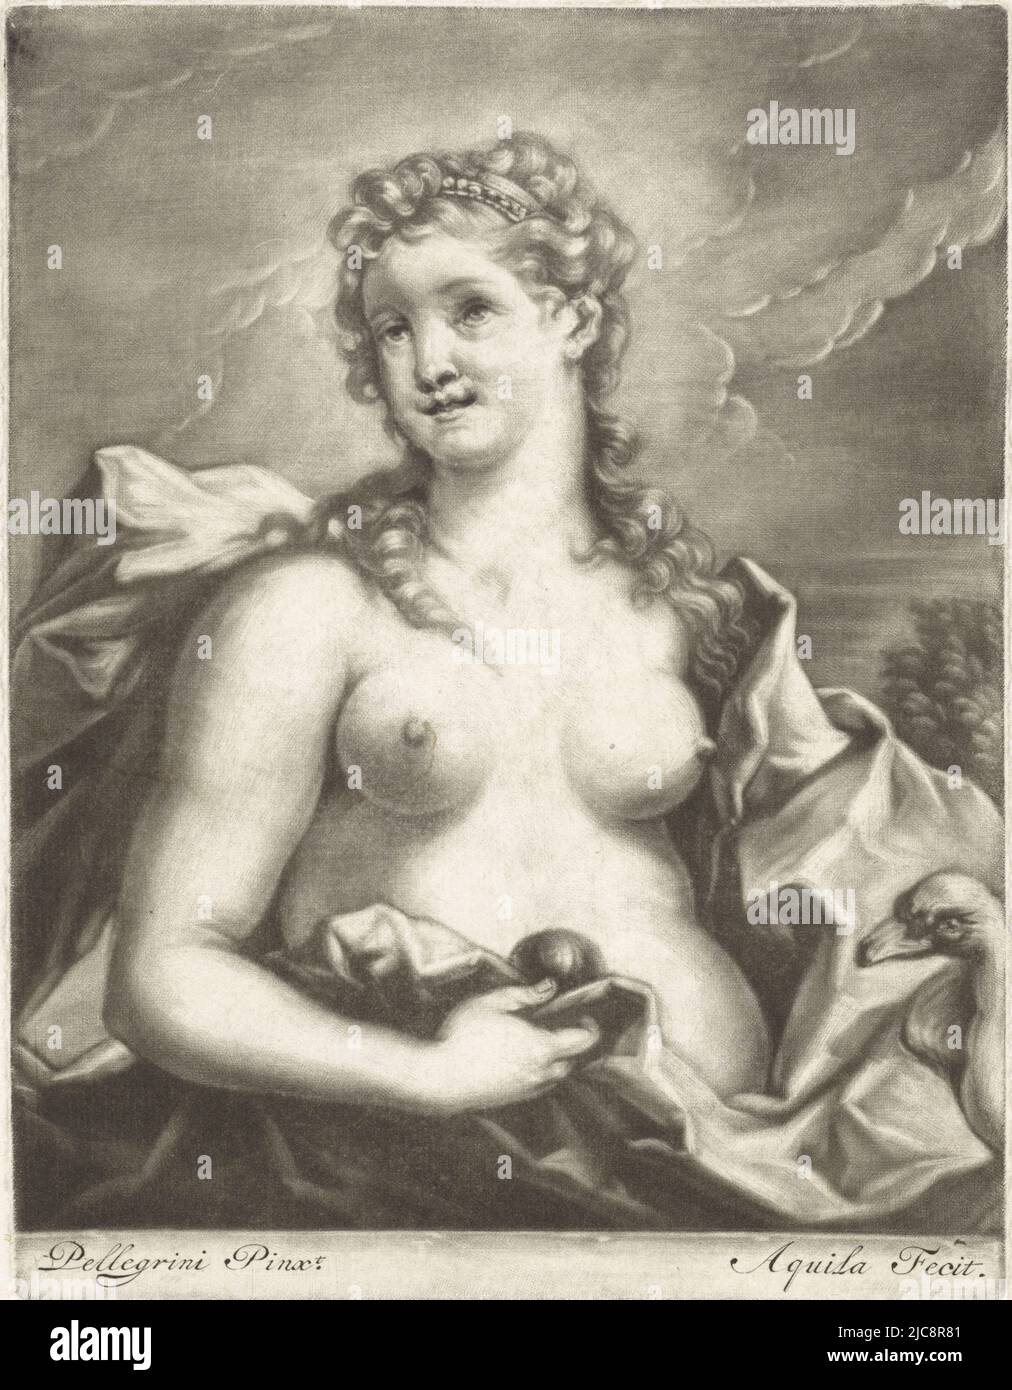 Venus with a Swan and an Apple, print maker: Arnoud van Halen, (mentioned on object), Giovanni Antonio Pellegrini, (mentioned on object), Amsterdam, 1685 - 1732, paper, engraving, h 183 mm × w 141 mm Stock Photo